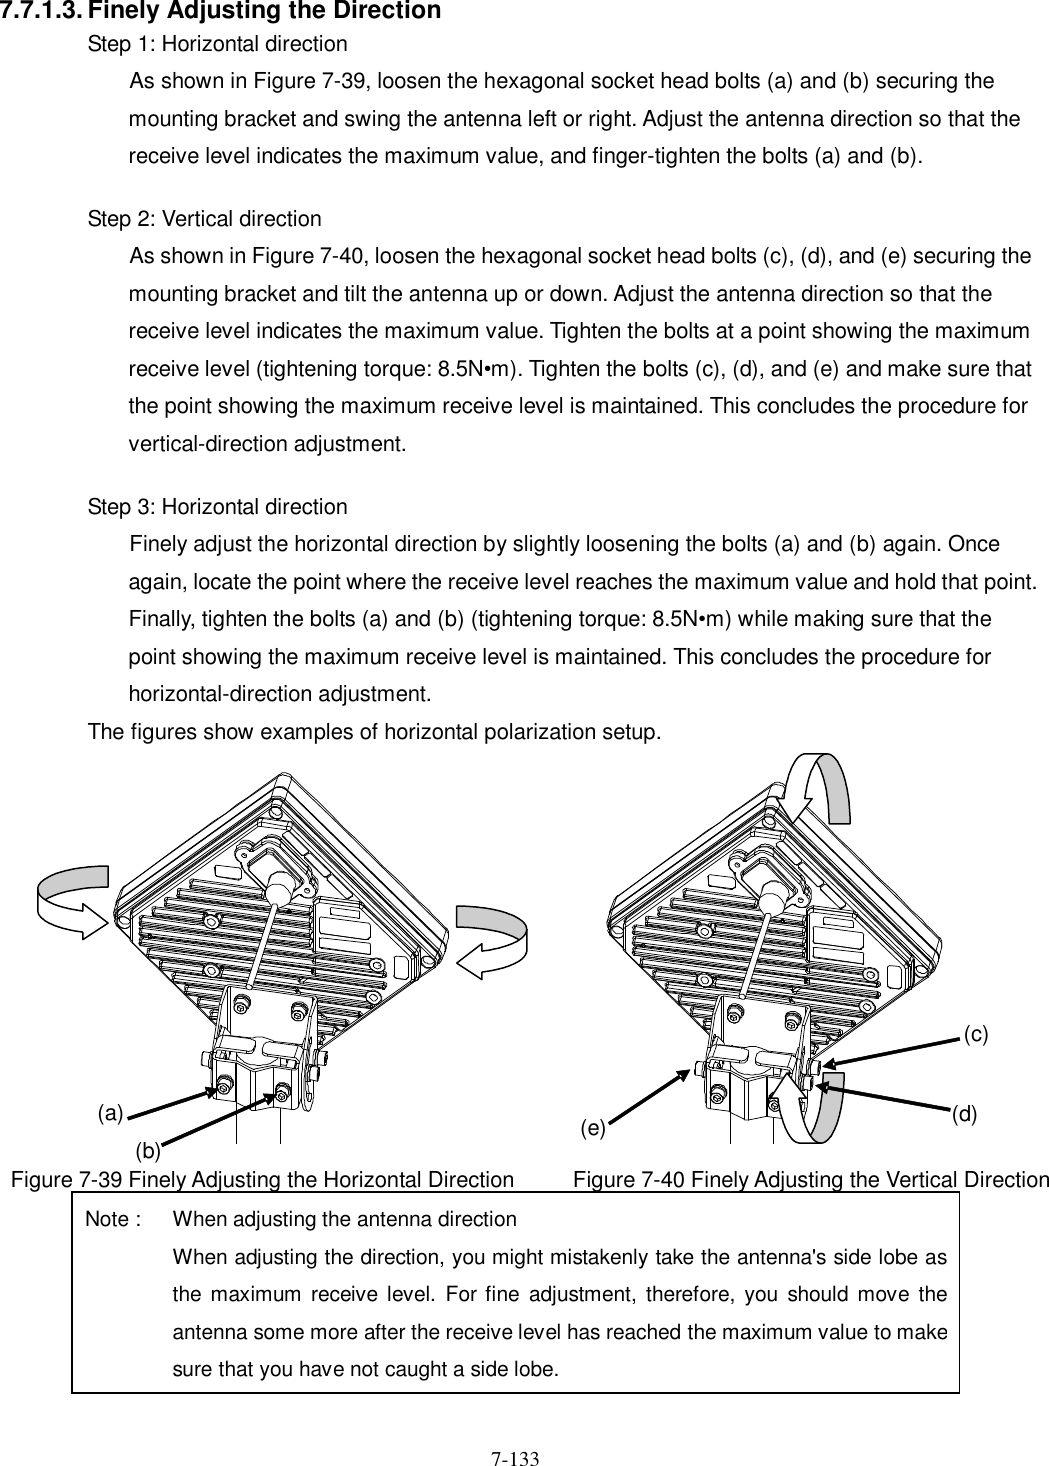   7-133 7.7.1.3. Finely Adjusting the Direction Step 1: Horizontal direction As shown in Figure 7-39, loosen the hexagonal socket head bolts (a) and (b) securing the mounting bracket and swing the antenna left or right. Adjust the antenna direction so that the receive level indicates the maximum value, and finger-tighten the bolts (a) and (b).  Step 2: Vertical direction As shown in Figure 7-40, loosen the hexagonal socket head bolts (c), (d), and (e) securing the mounting bracket and tilt the antenna up or down. Adjust the antenna direction so that the receive level indicates the maximum value. Tighten the bolts at a point showing the maximum receive level (tightening torque: 8.5N•m). Tighten the bolts (c), (d), and (e) and make sure that the point showing the maximum receive level is maintained. This concludes the procedure for vertical-direction adjustment.  Step 3: Horizontal direction Finely adjust the horizontal direction by slightly loosening the bolts (a) and (b) again. Once again, locate the point where the receive level reaches the maximum value and hold that point. Finally, tighten the bolts (a) and (b) (tightening torque: 8.5N•m) while making sure that the point showing the maximum receive level is maintained. This concludes the procedure for horizontal-direction adjustment. The figures show examples of horizontal polarization setup.  Figure 7-39 Finely Adjusting the Horizontal Direction Figure 7-40 Finely Adjusting the Vertical Direction (a) (b) (d) (c) (e) Note :  When adjusting the antenna direction   When adjusting the direction, you might mistakenly take the antenna&apos;s side lobe as the maximum  receive level.  For fine  adjustment,  therefore, you should move  the antenna some more after the receive level has reached the maximum value to make sure that you have not caught a side lobe. 